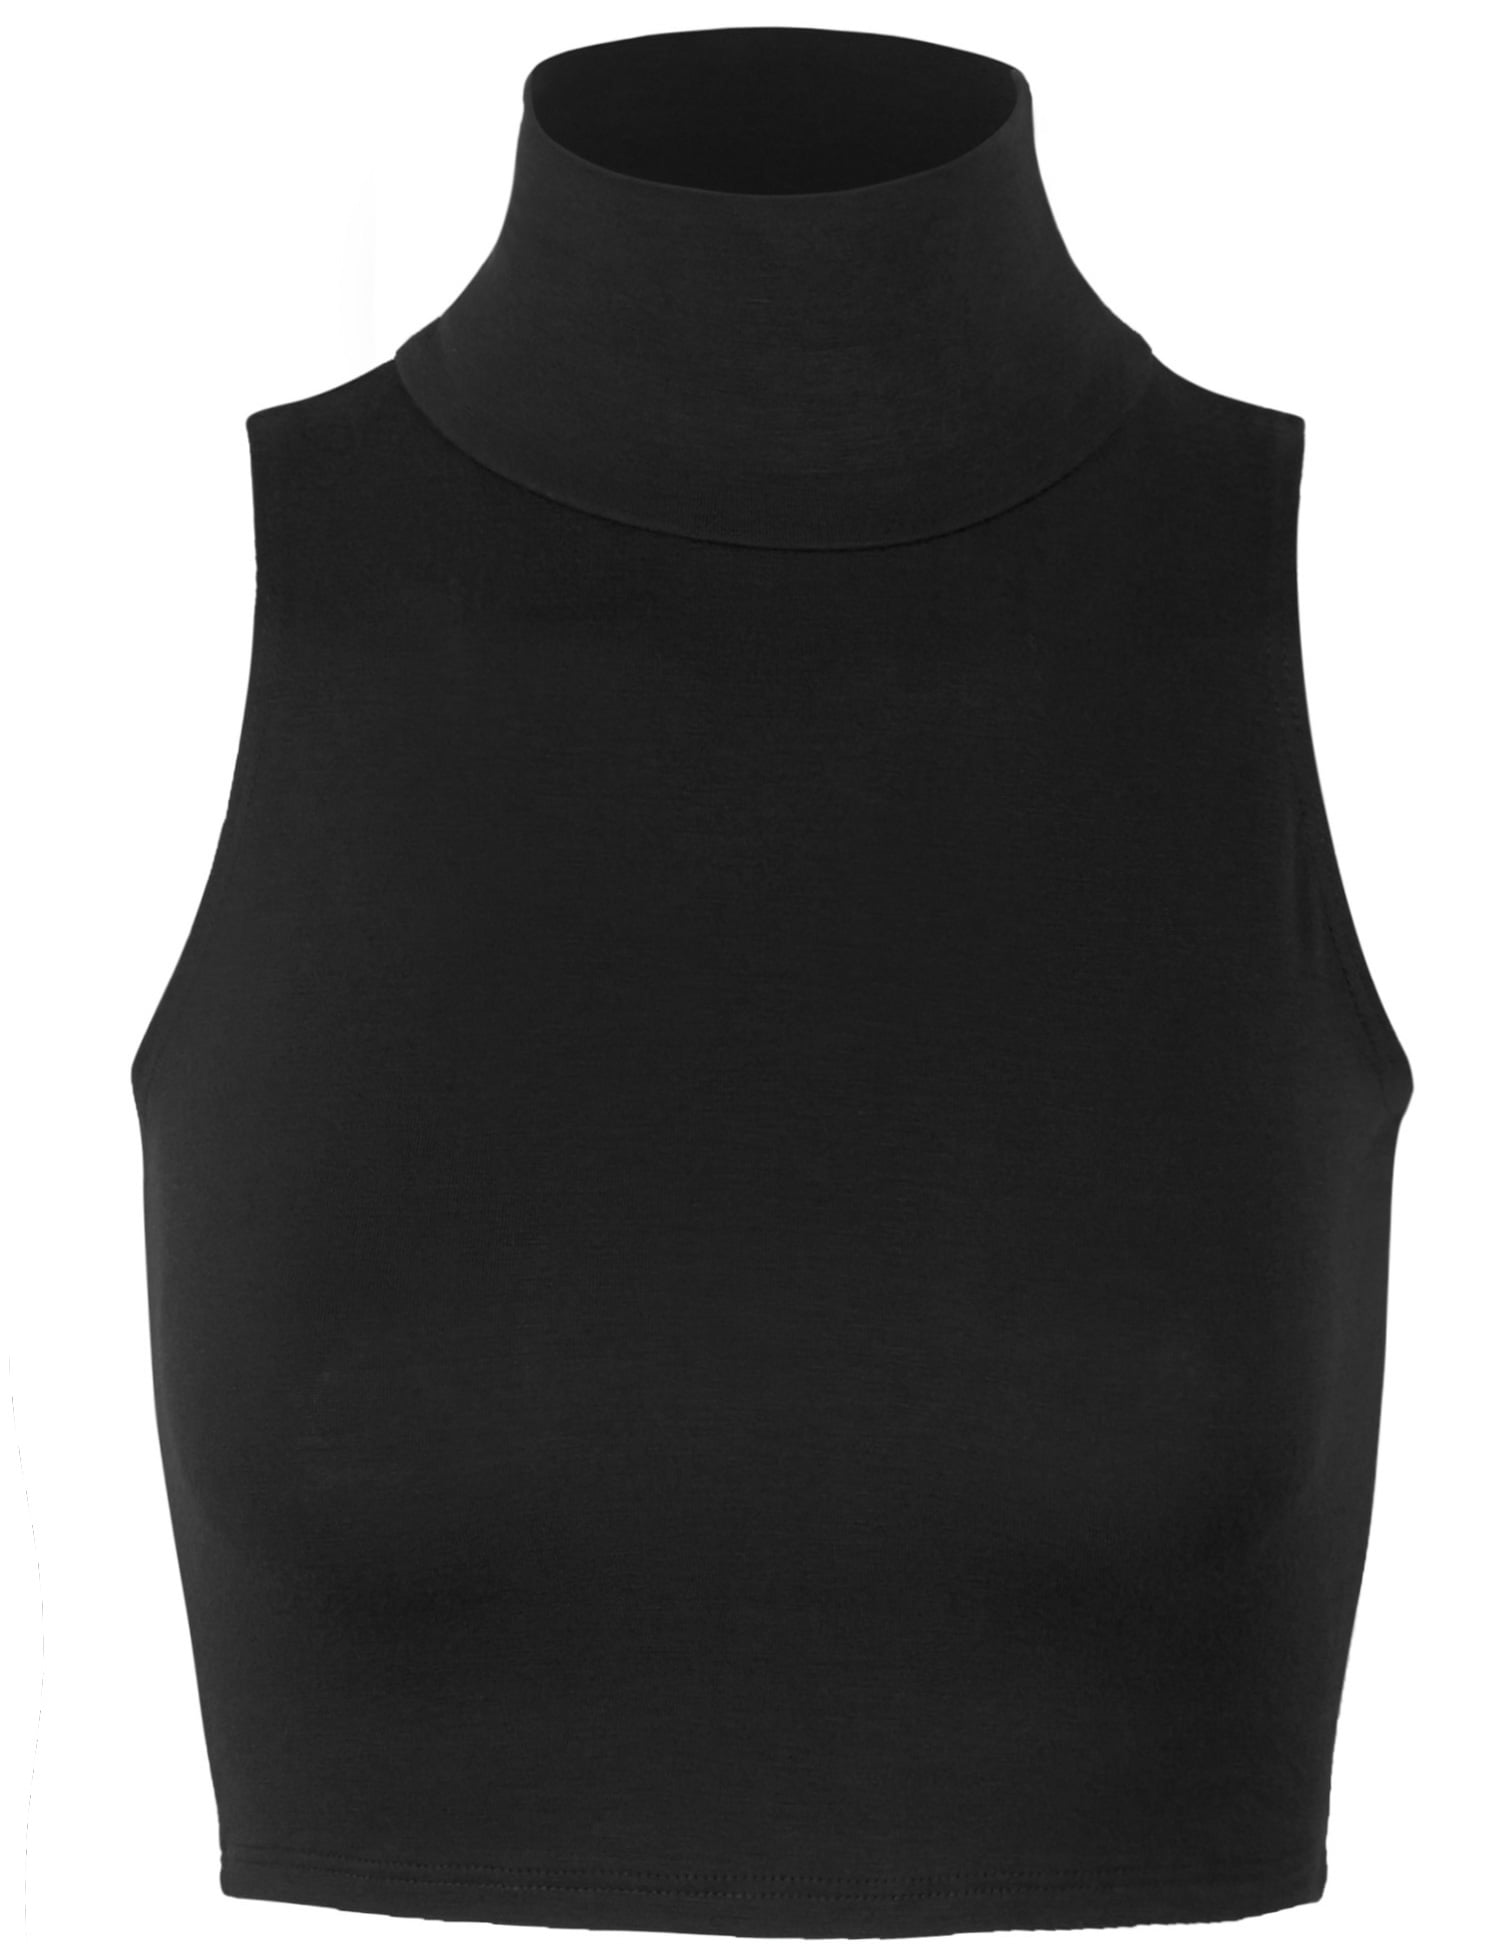 KOGMO Women's Lightweight Fitted Sleeveless Turtleneck Crop Top with ...